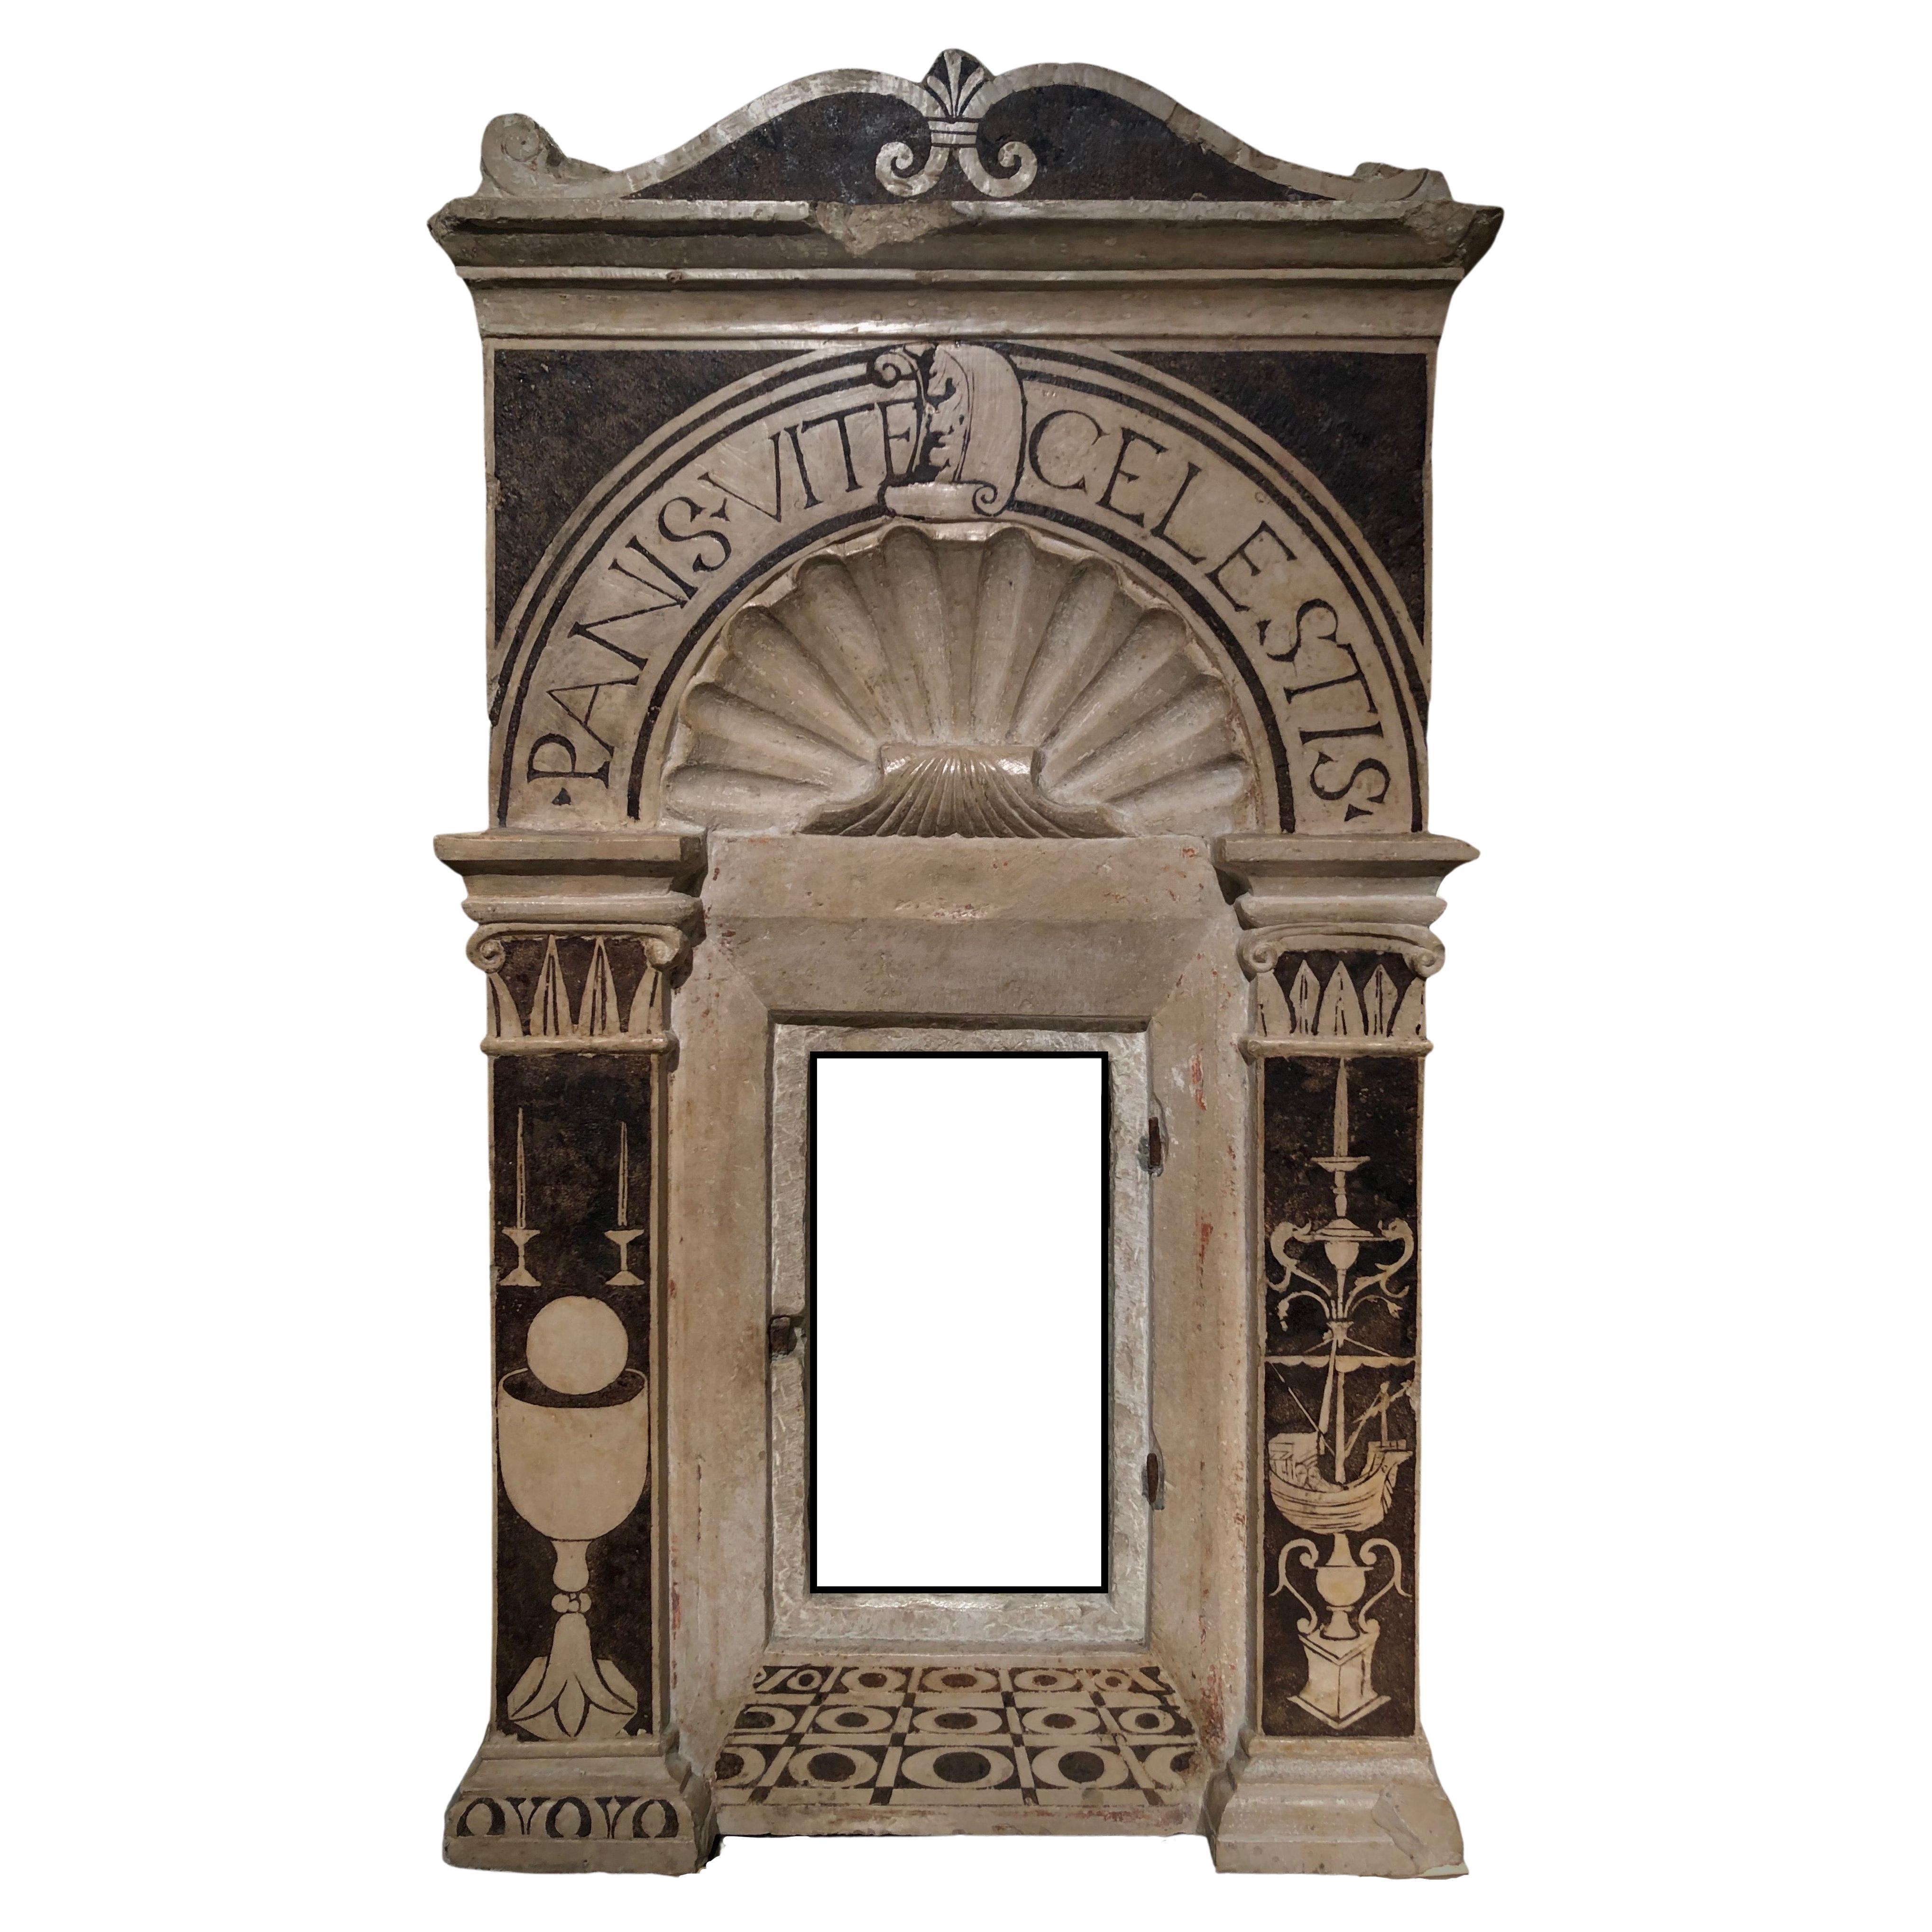 Renaissance Tabernacle Front - Tuscany, first half of the 16th century